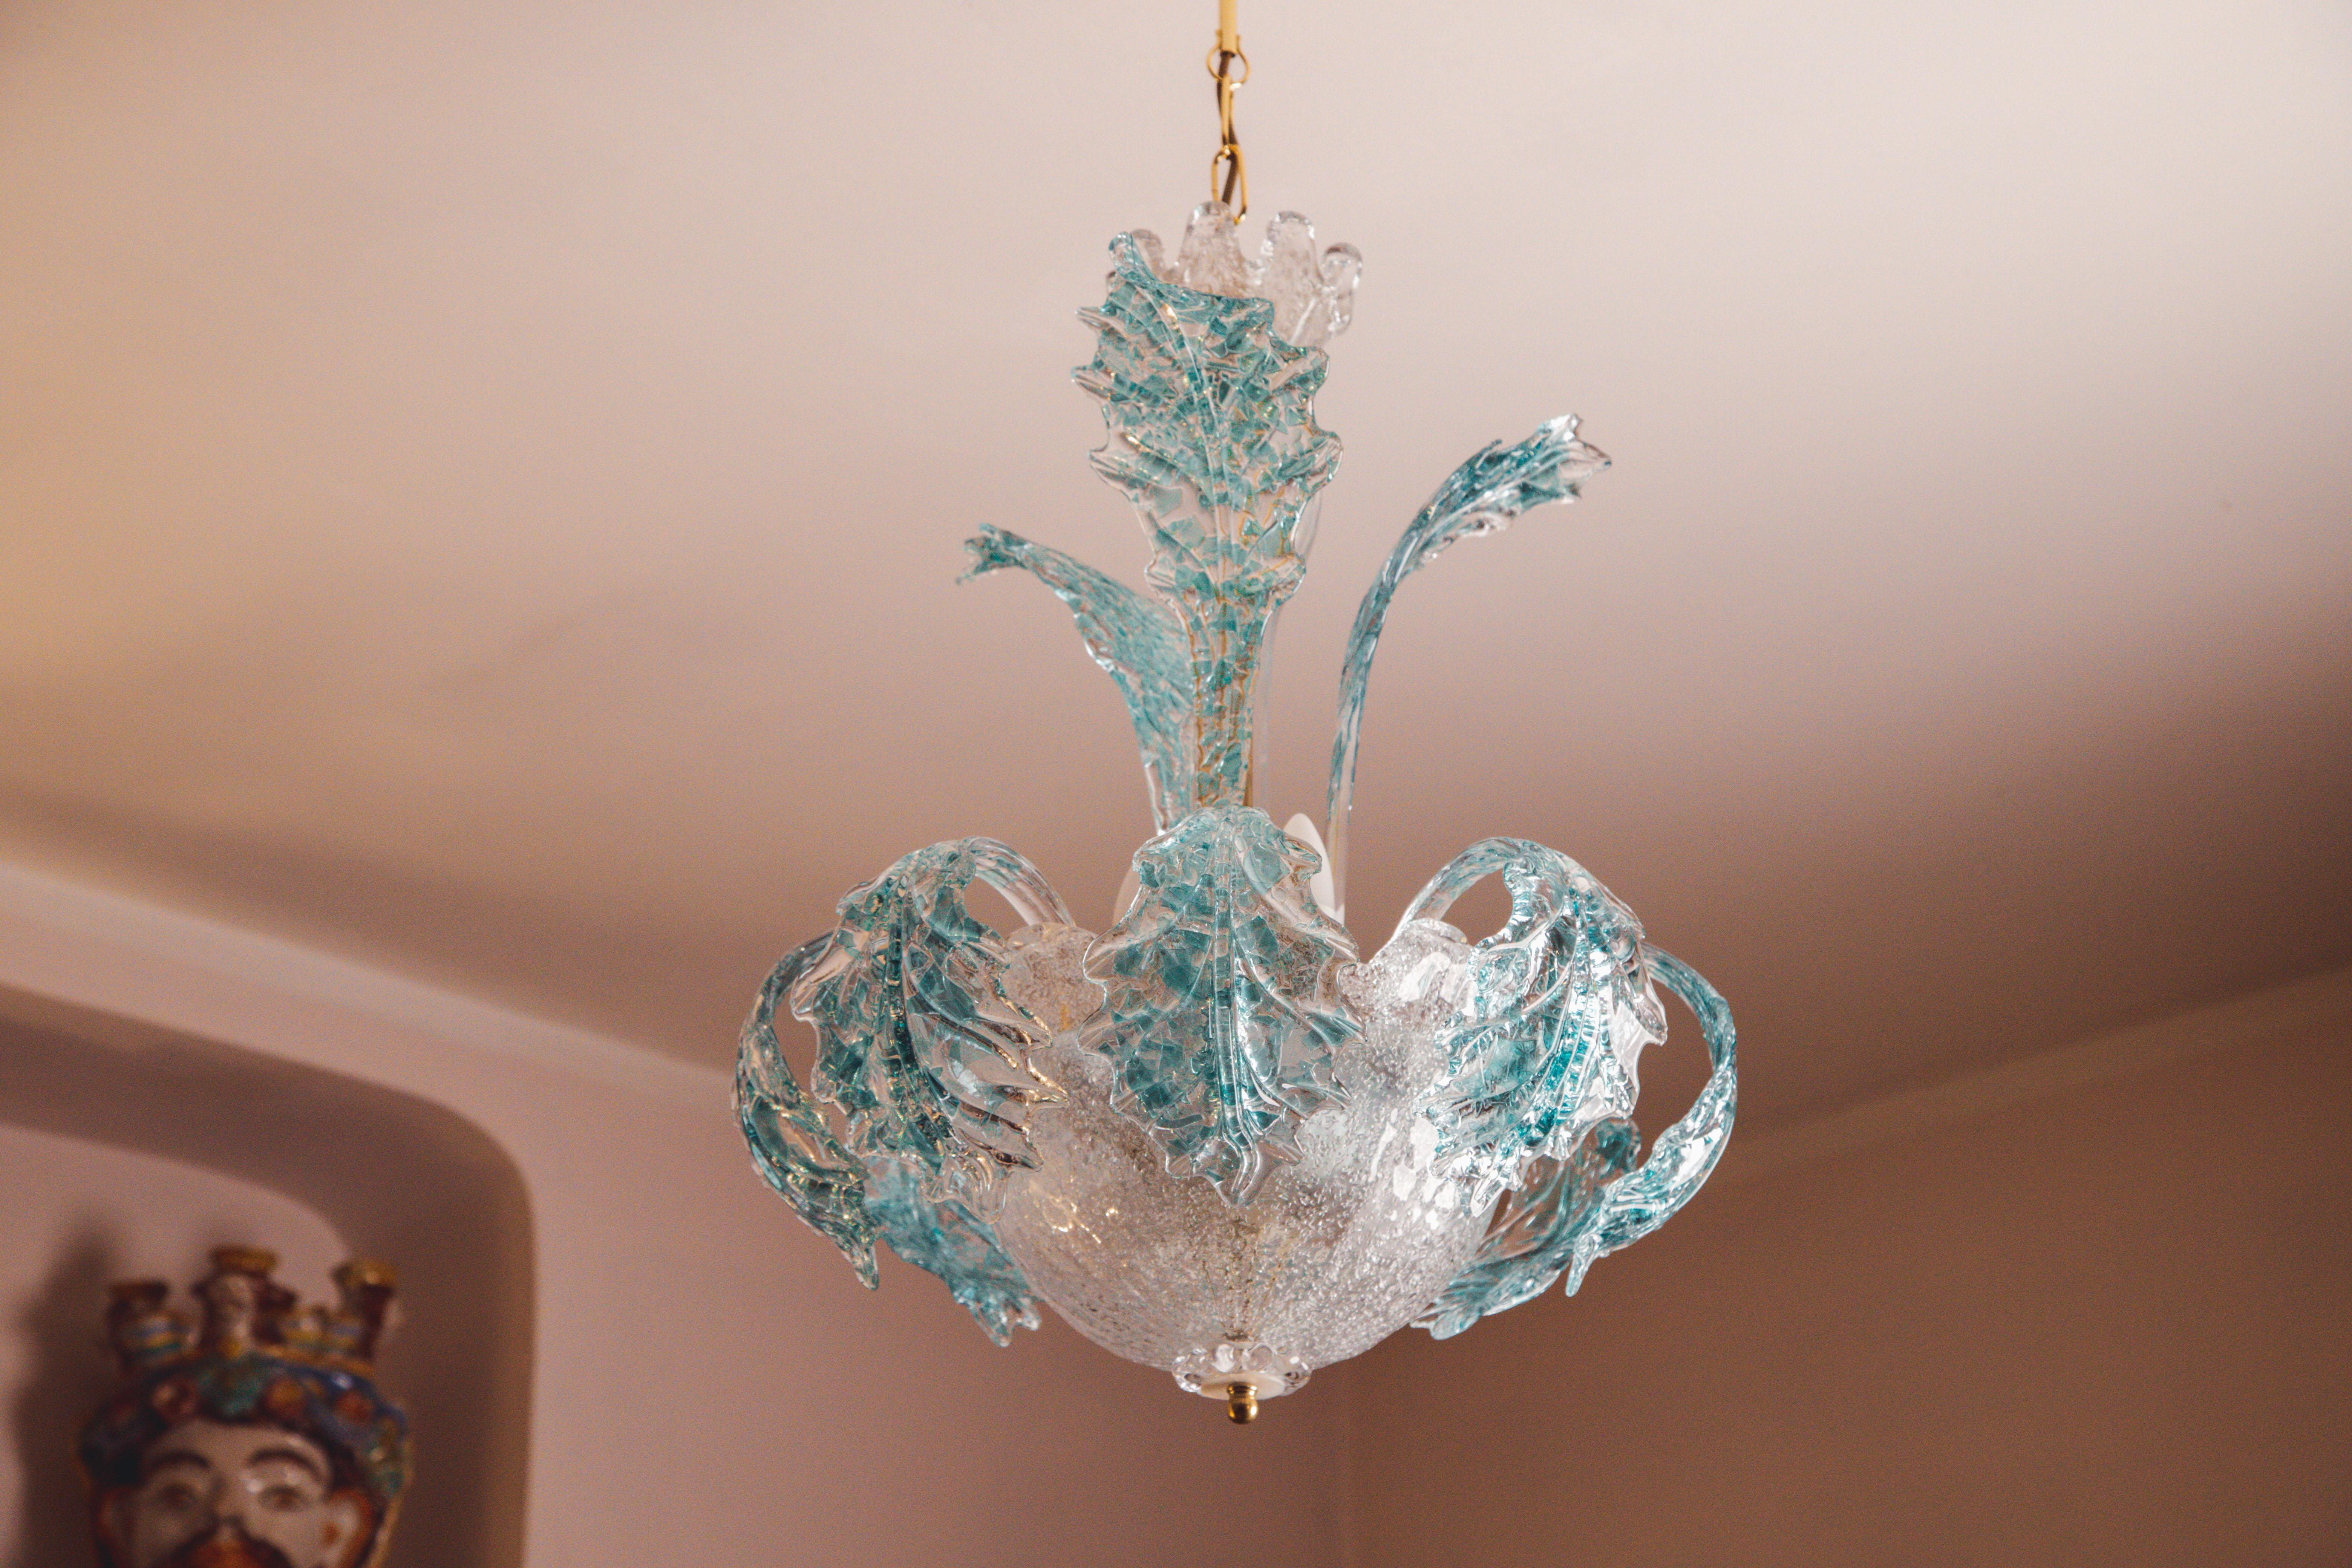 Stunning Murano chandelier with blue grained glass.
The chandelier mounts 5 light points with e14 socket, three light points go upwards, two downwards, this gives the chandelier a strong luminosity.
The chandelier is 90 centimetres high with the